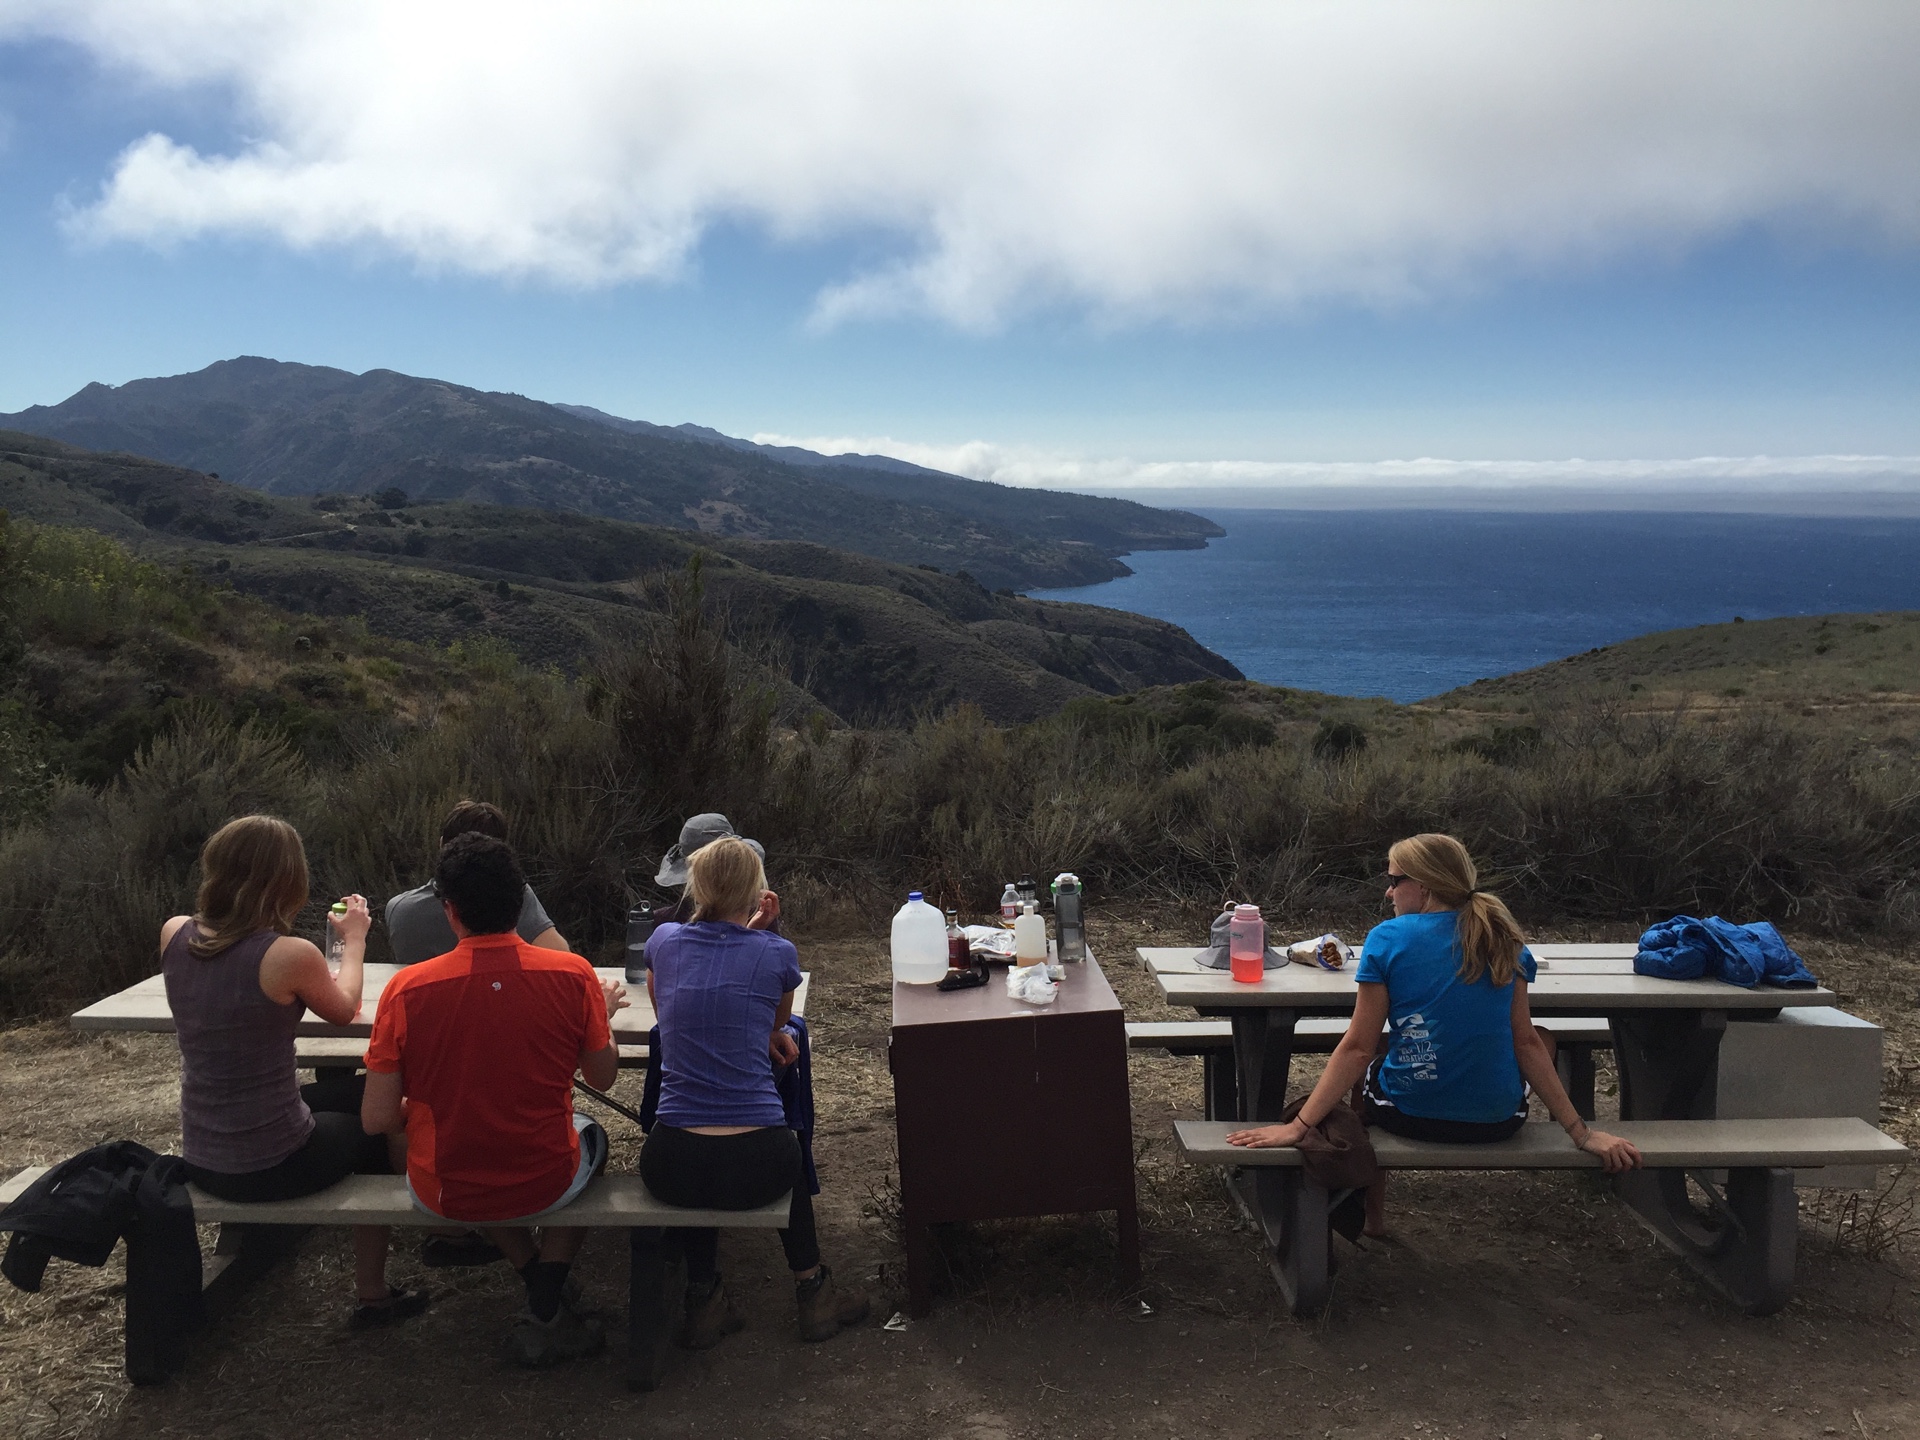 Campers enjoy the view from Del Norte Campground above Prisoner's Harbor on Santa Cruz Island, California.